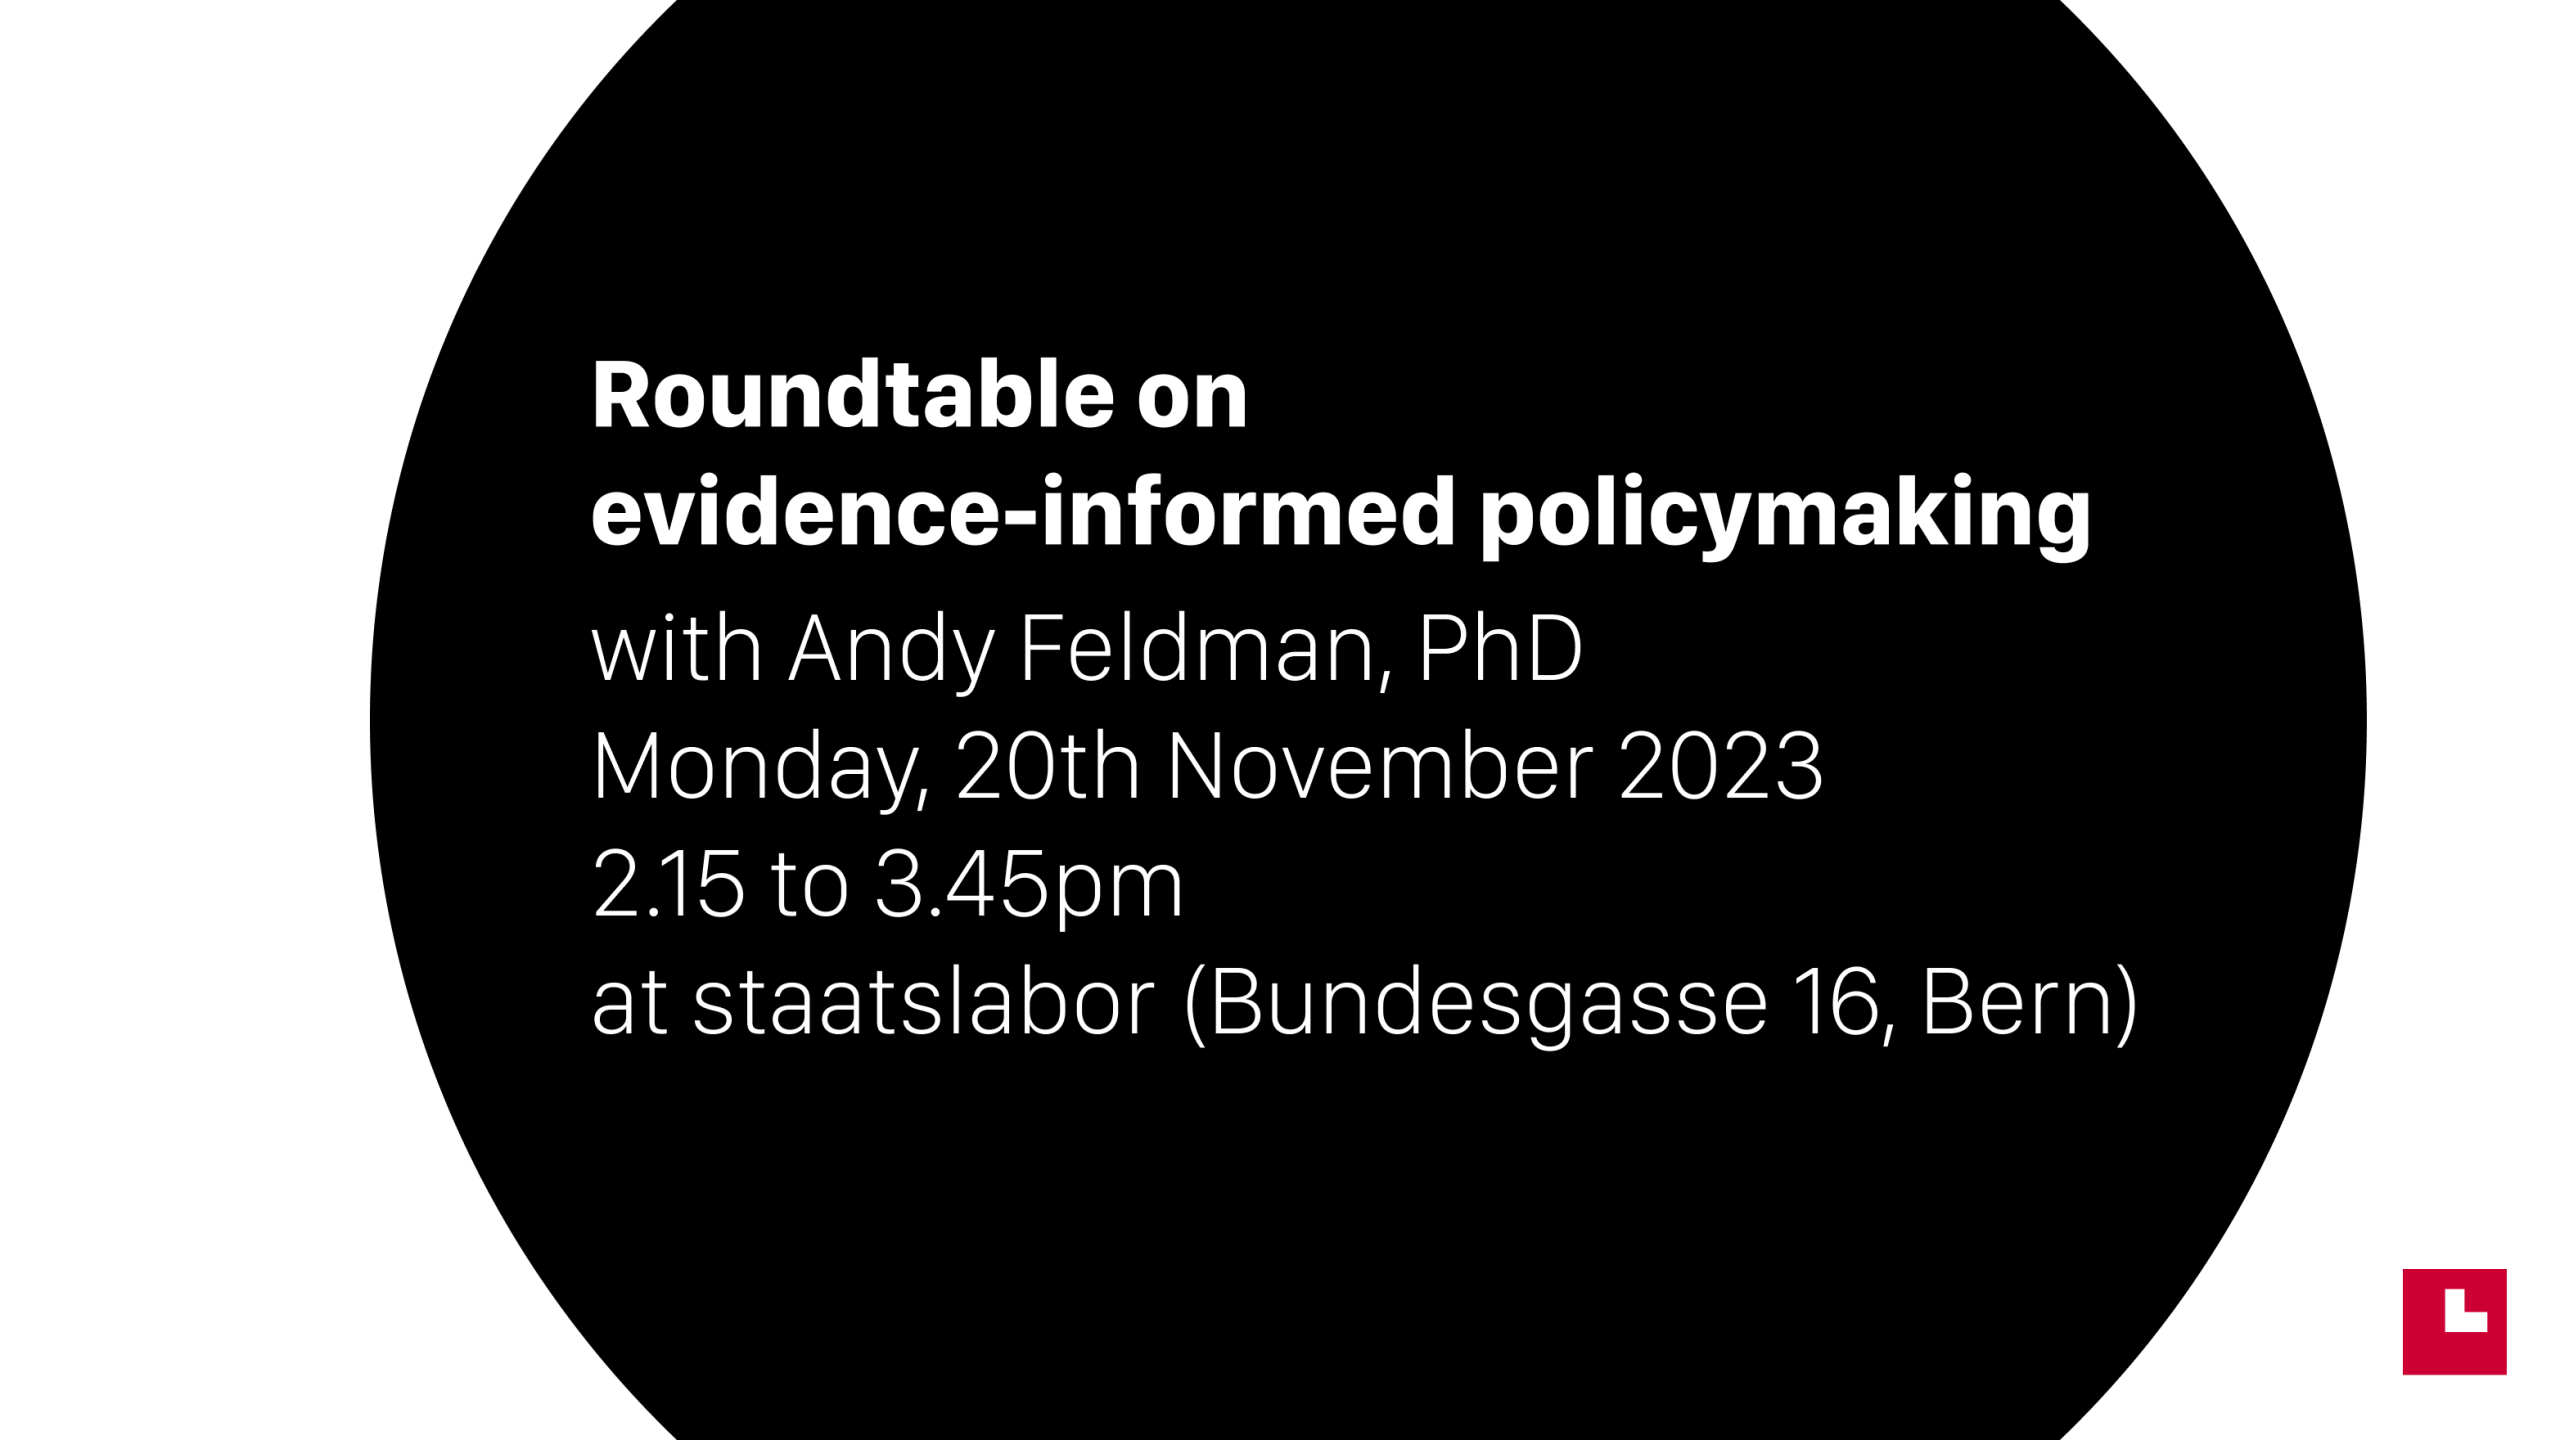 Roundtable with Andy Feldman